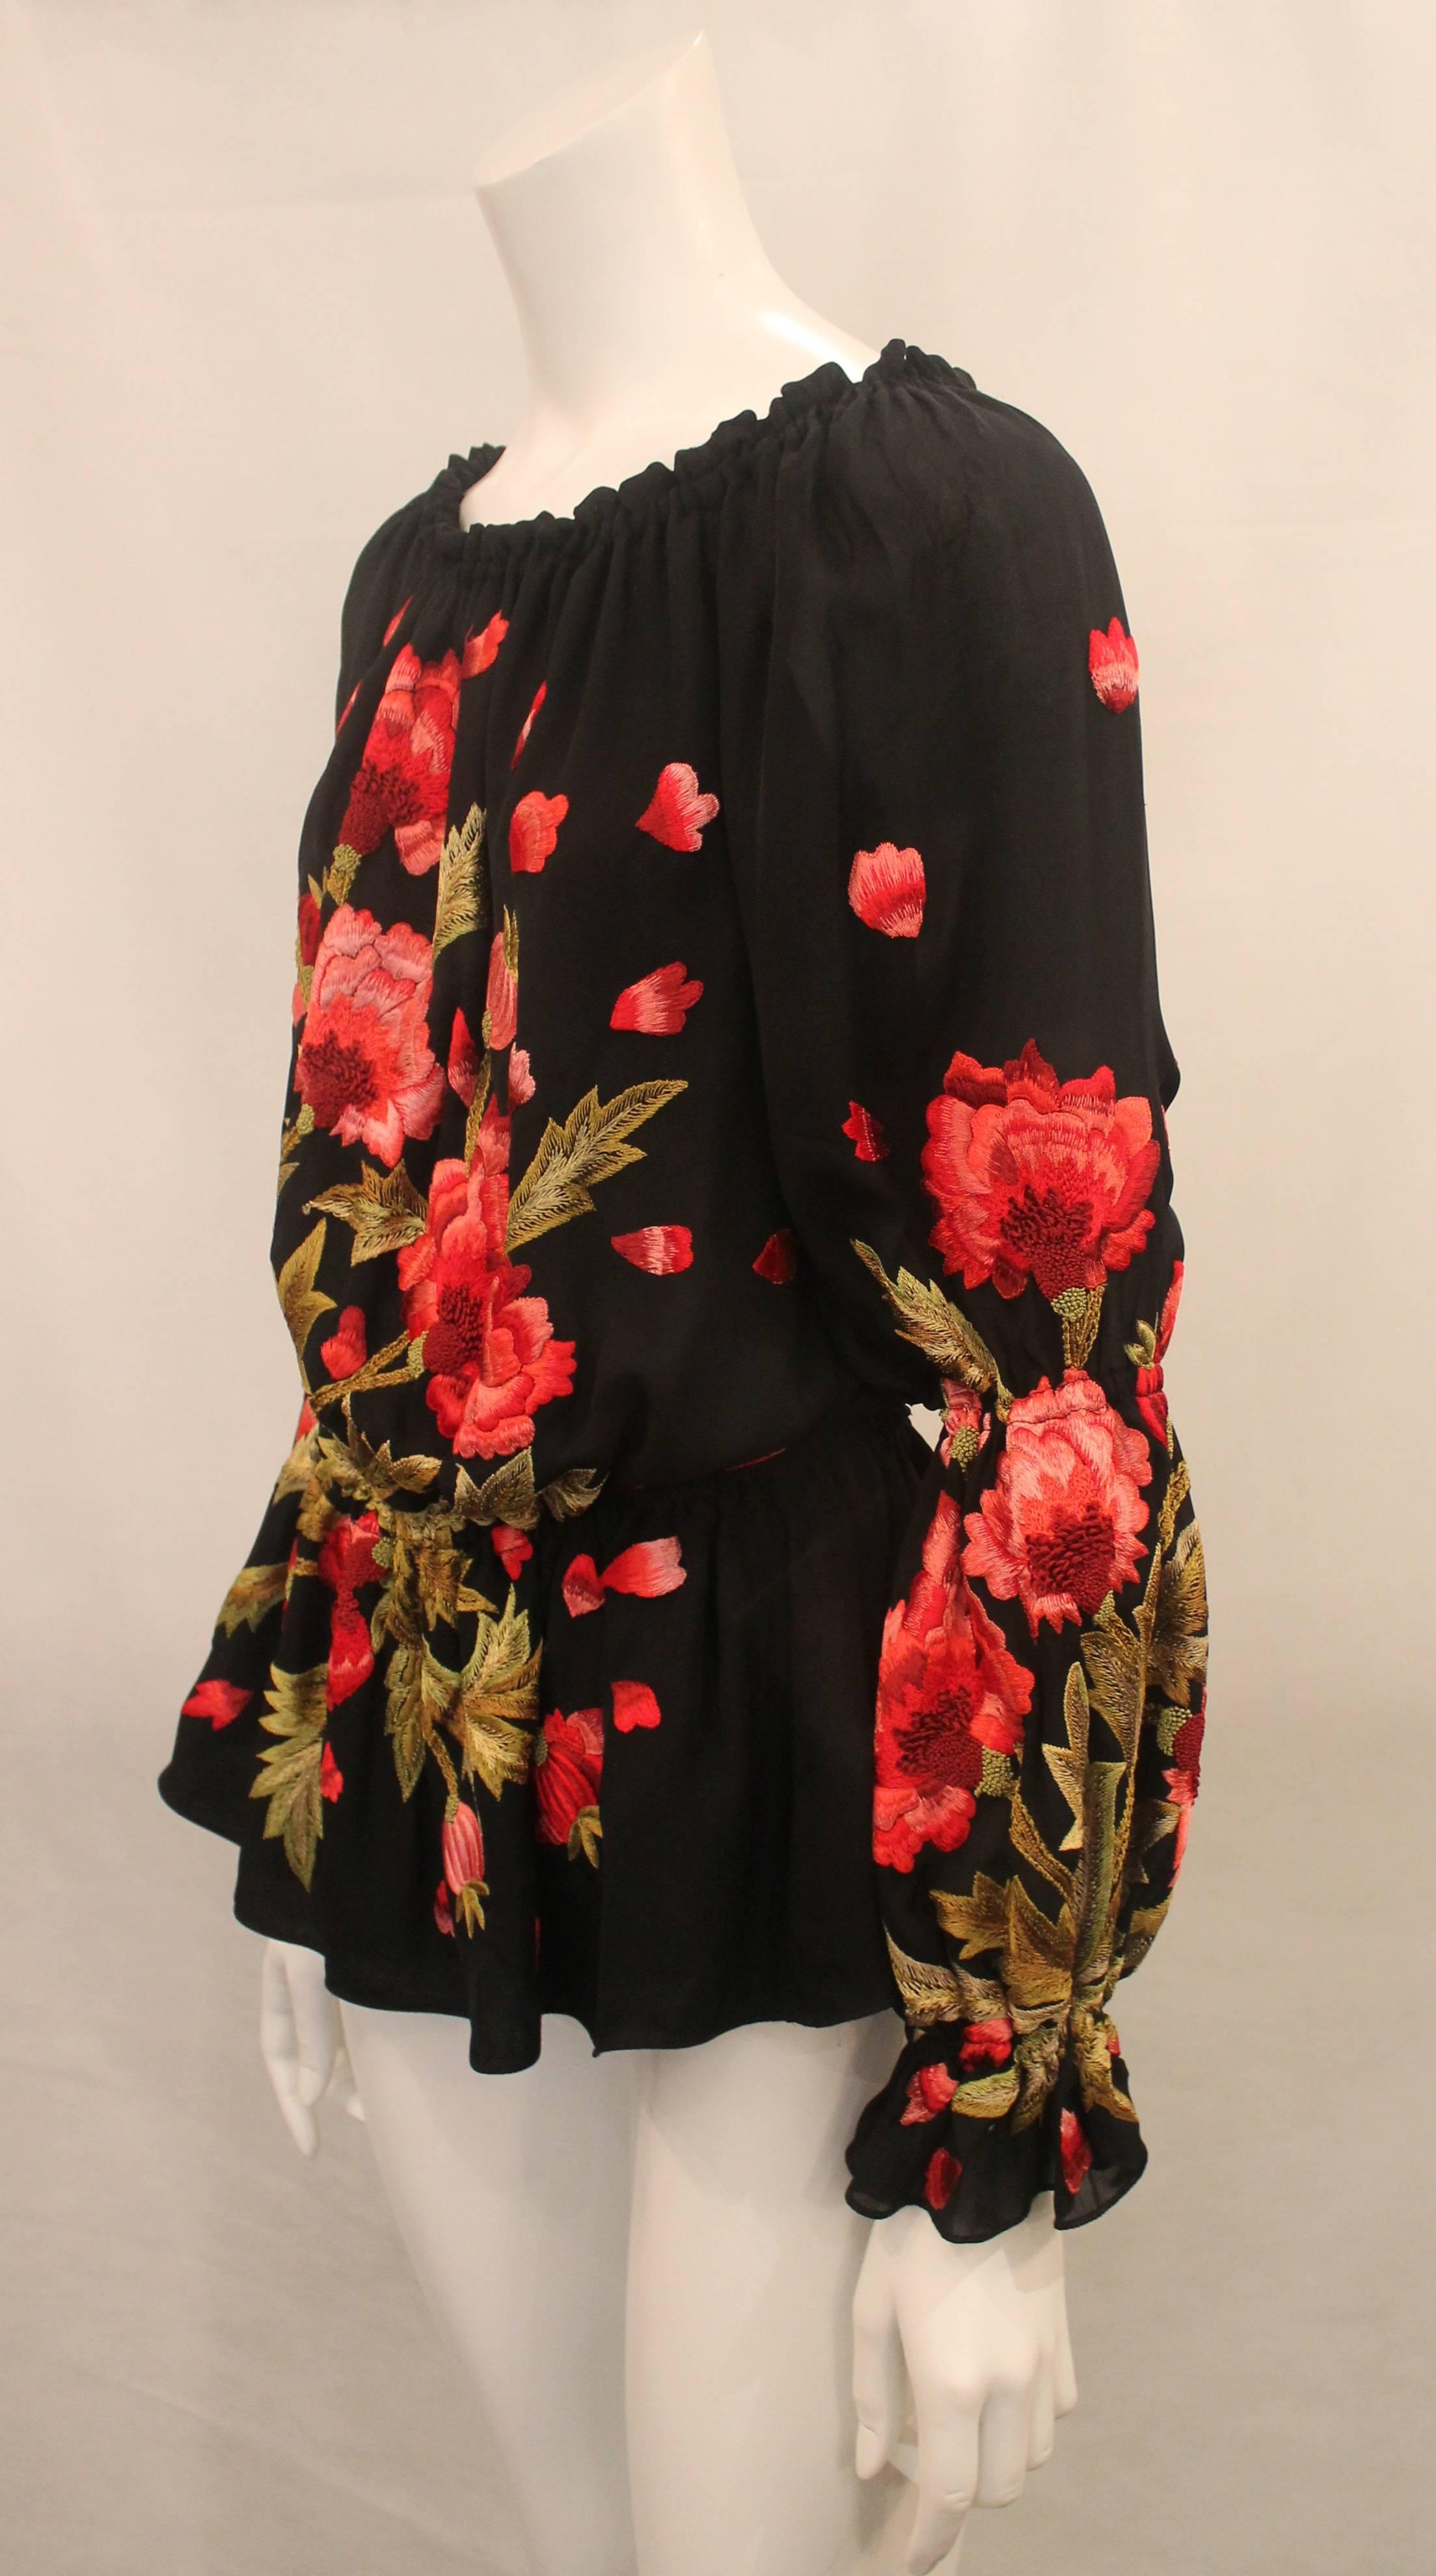 Naeem Khan Black Silk Peasant Blouse with Floral Embroidery - M. This trendy long sleeve blouse is in excellent condition with light wear. It features a floral embroidery with pink and red stitching and an elastic band at the neckline, hips and